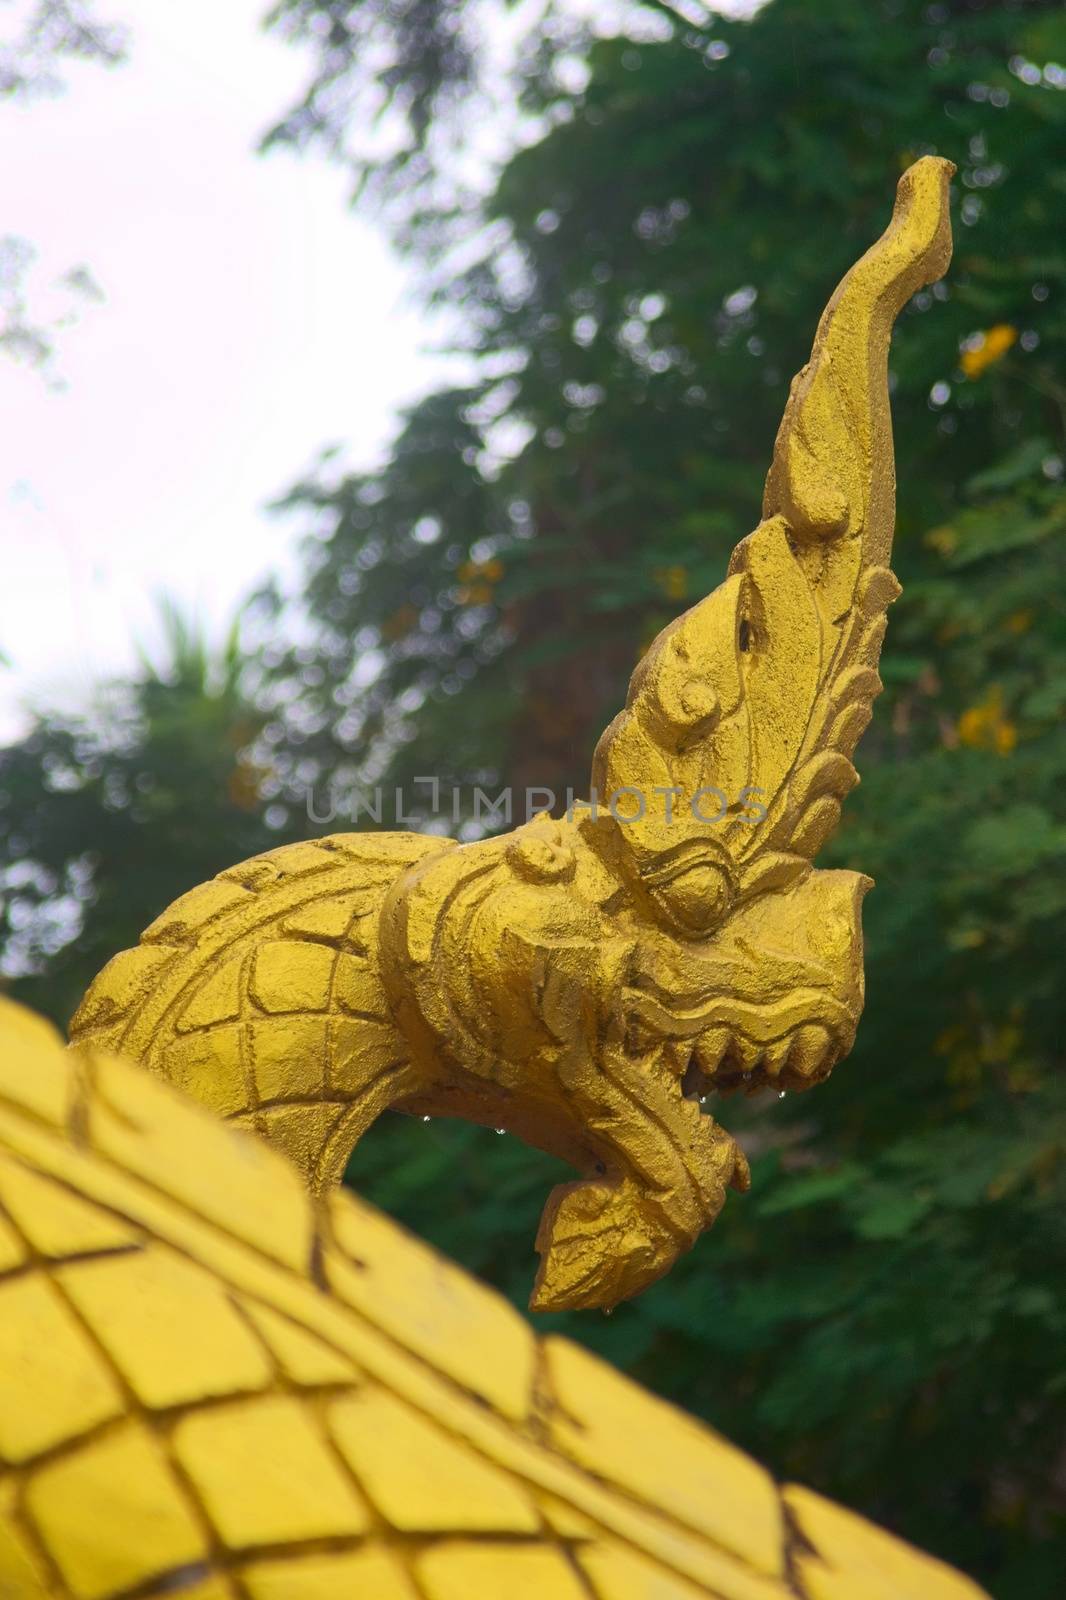 Gilded sculpture of a Naga serpent, a mythological protector creature, at the entrance of a Buddhist temple in Luang Prabang, Laos.